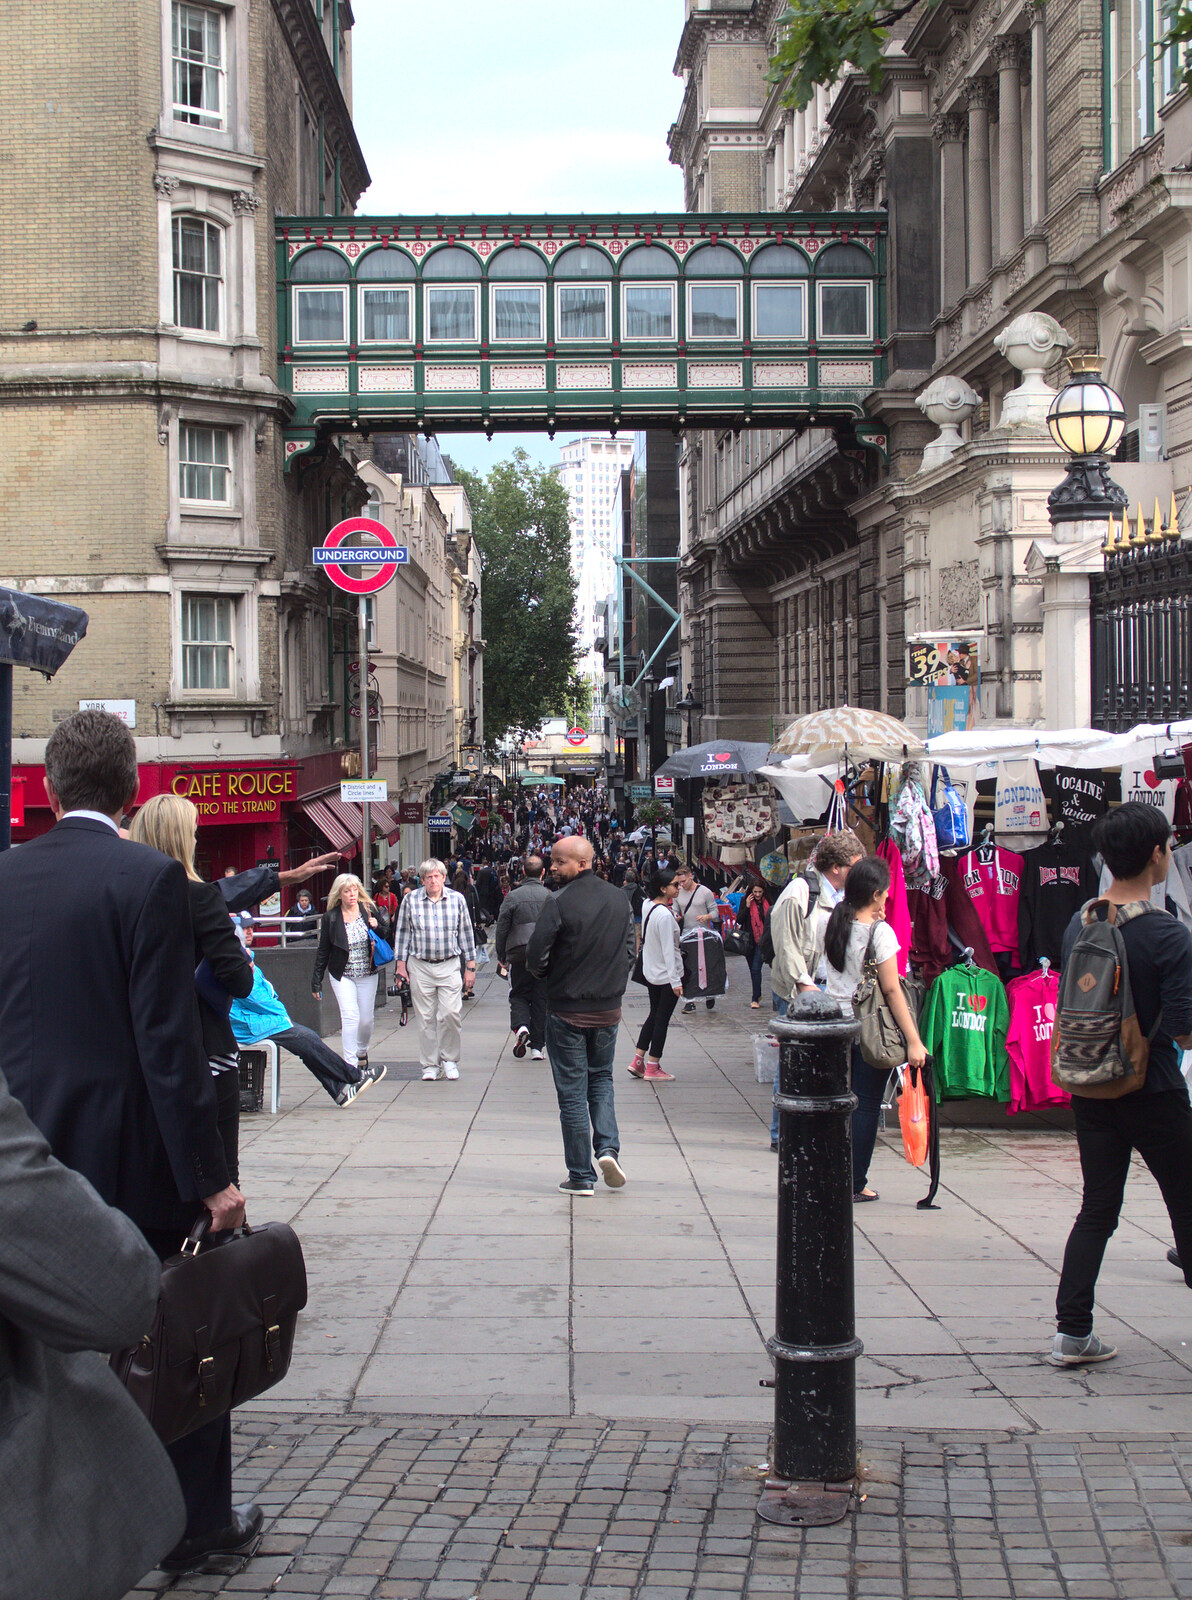 Villiers Street off the Strand from SwiftKey Innovation Day, and Pizza Pub, Westminster and Southwark - 14th August 2014